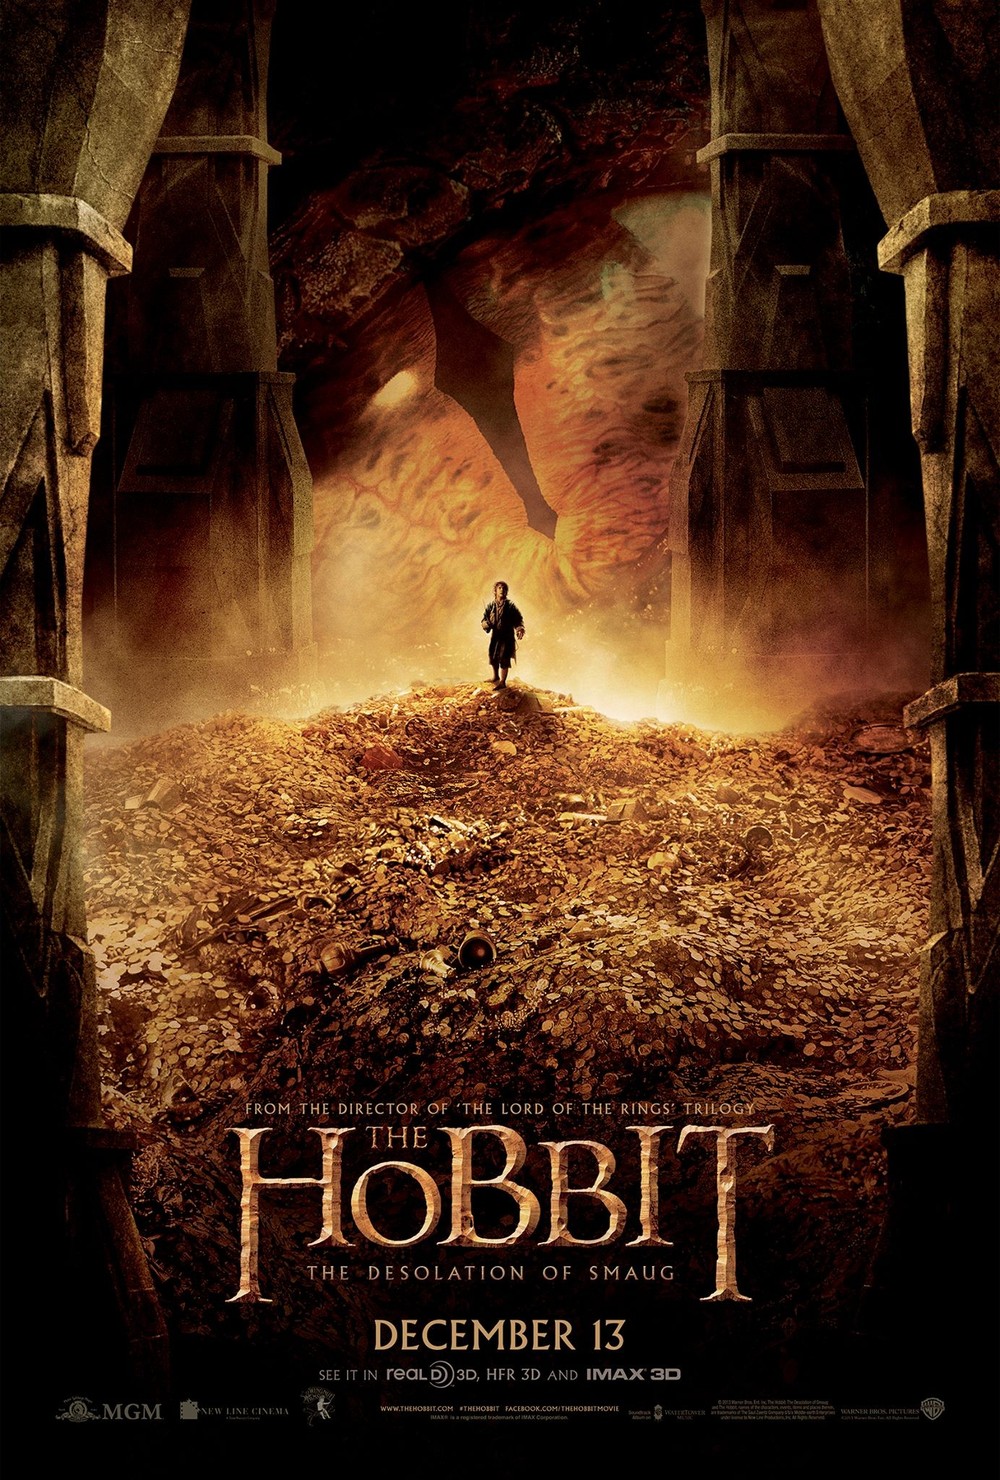 The Hobbit The Desolation of Smaug DVD Release Date